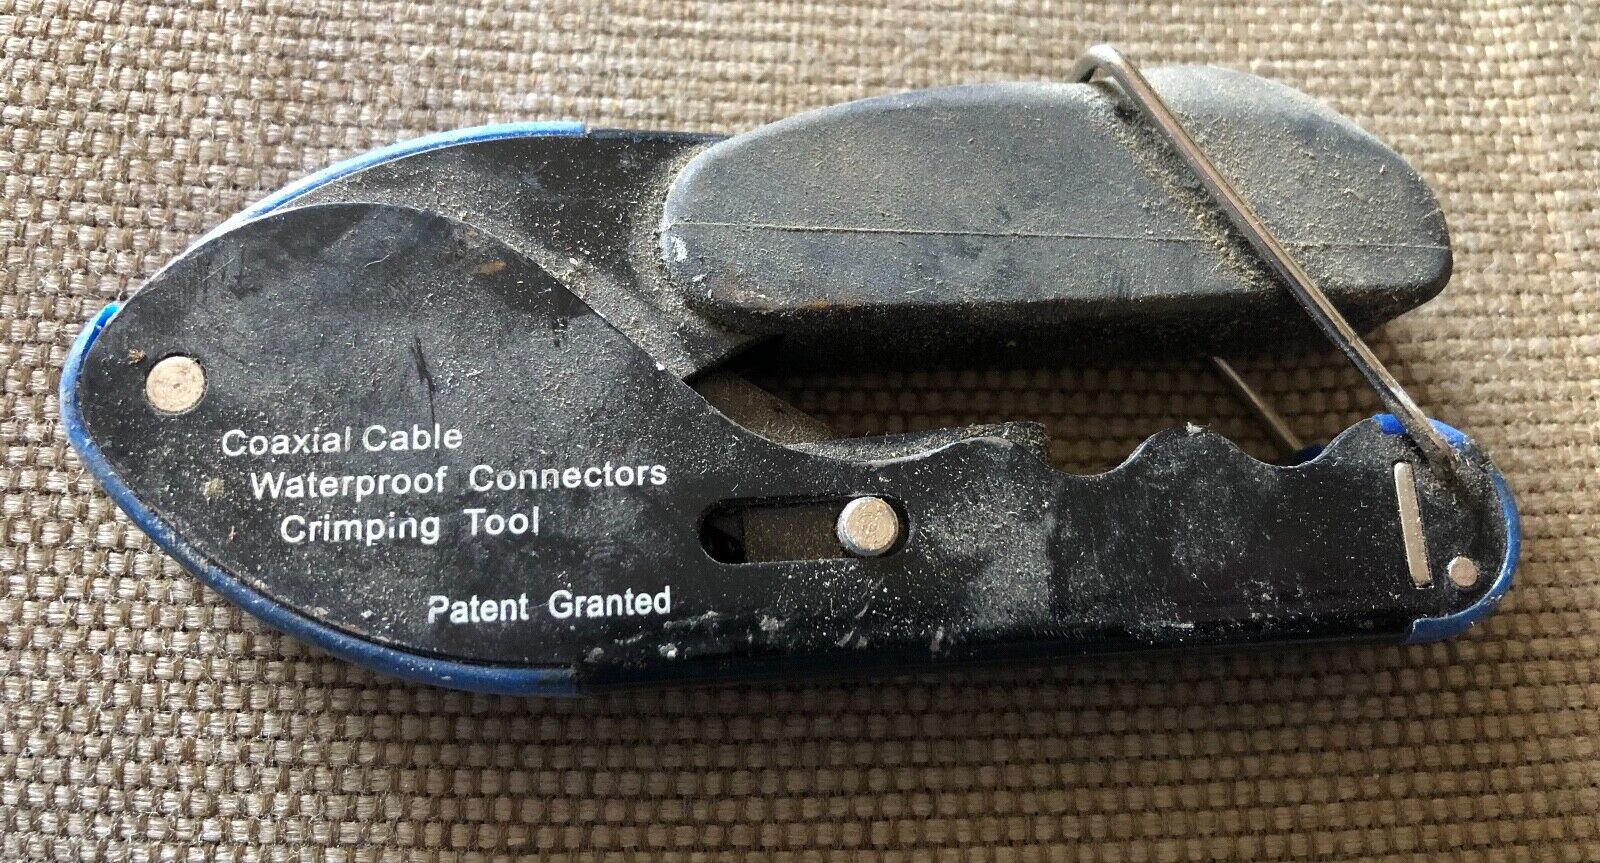 Coaxial Cable Waterproof Connectors Crimping Tool - Patented